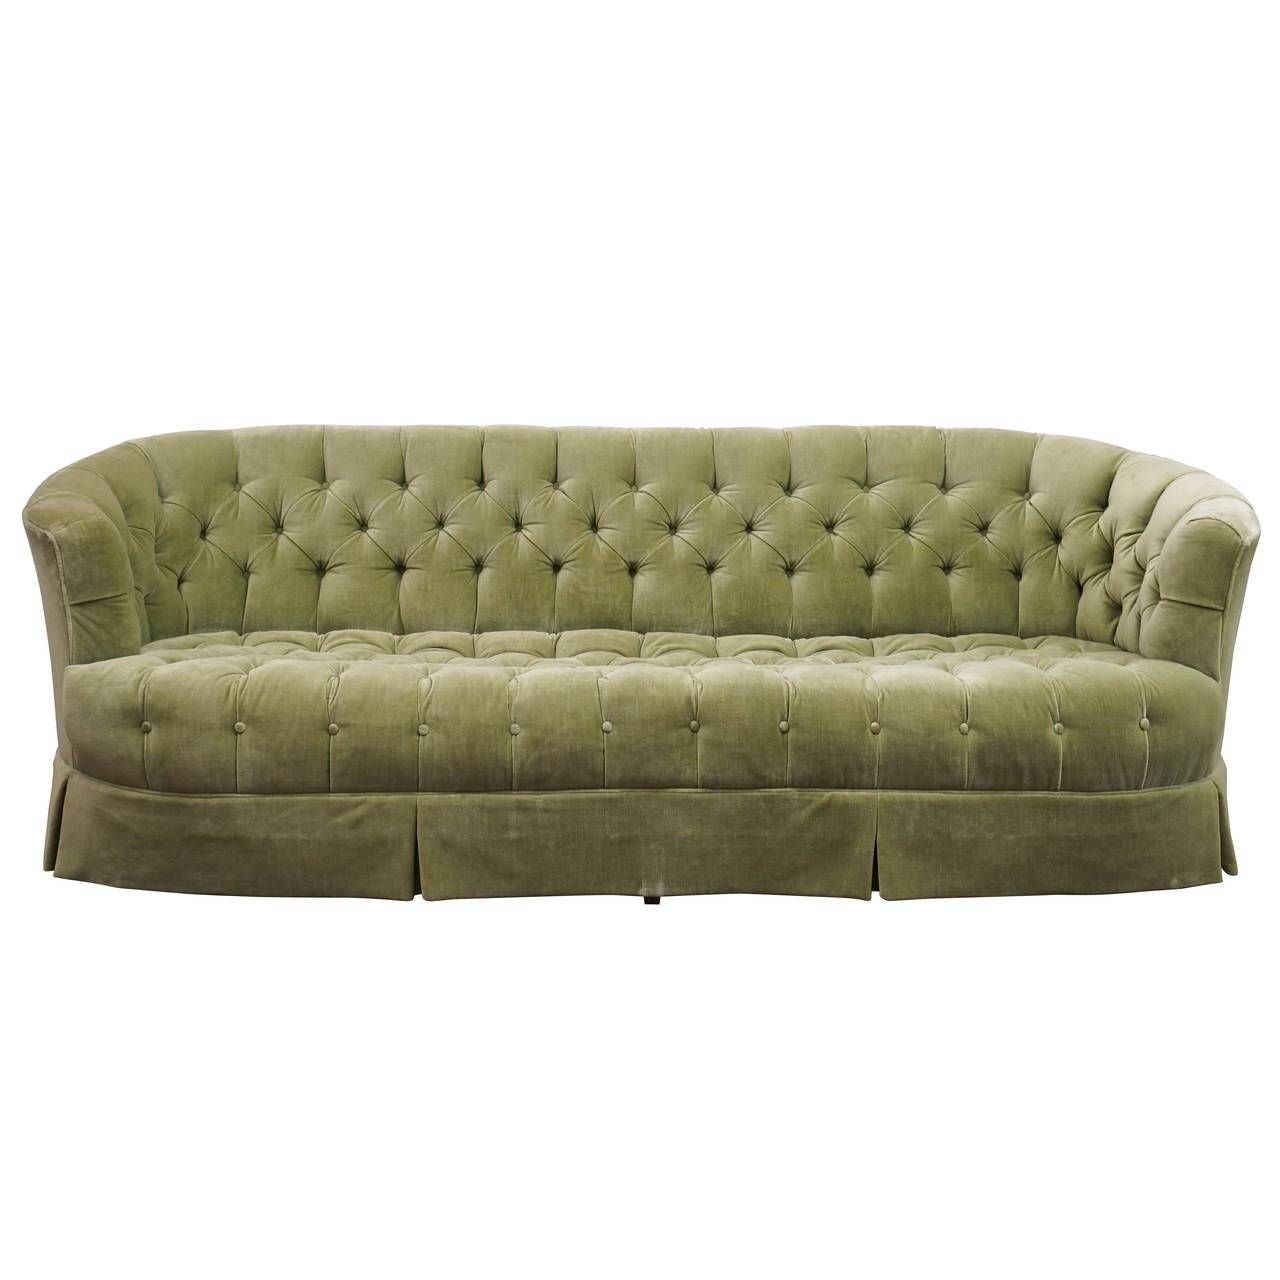 Hollywood Regency Chesterfield Mint Green Velvet Tufted Sofa At For Mint Green Sofas (View 14 of 15)